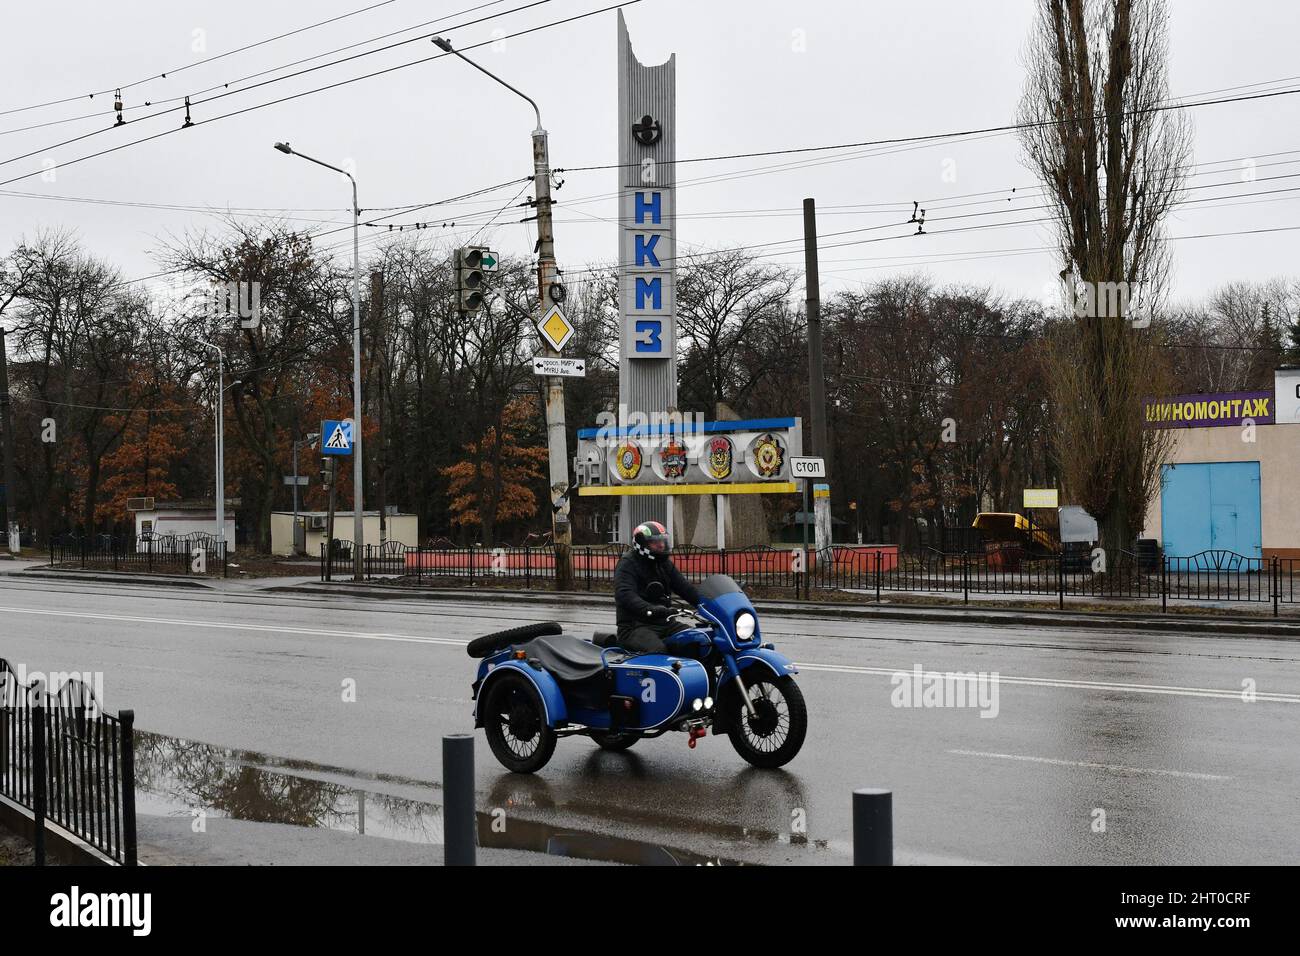 A man is seeing riding a retro motorcycle on the empty highway in the  Kramatorsk. Russian President Vladimir Putin ordered the military  intervention February 24, days after recognizing two separatist-held  enclaves in